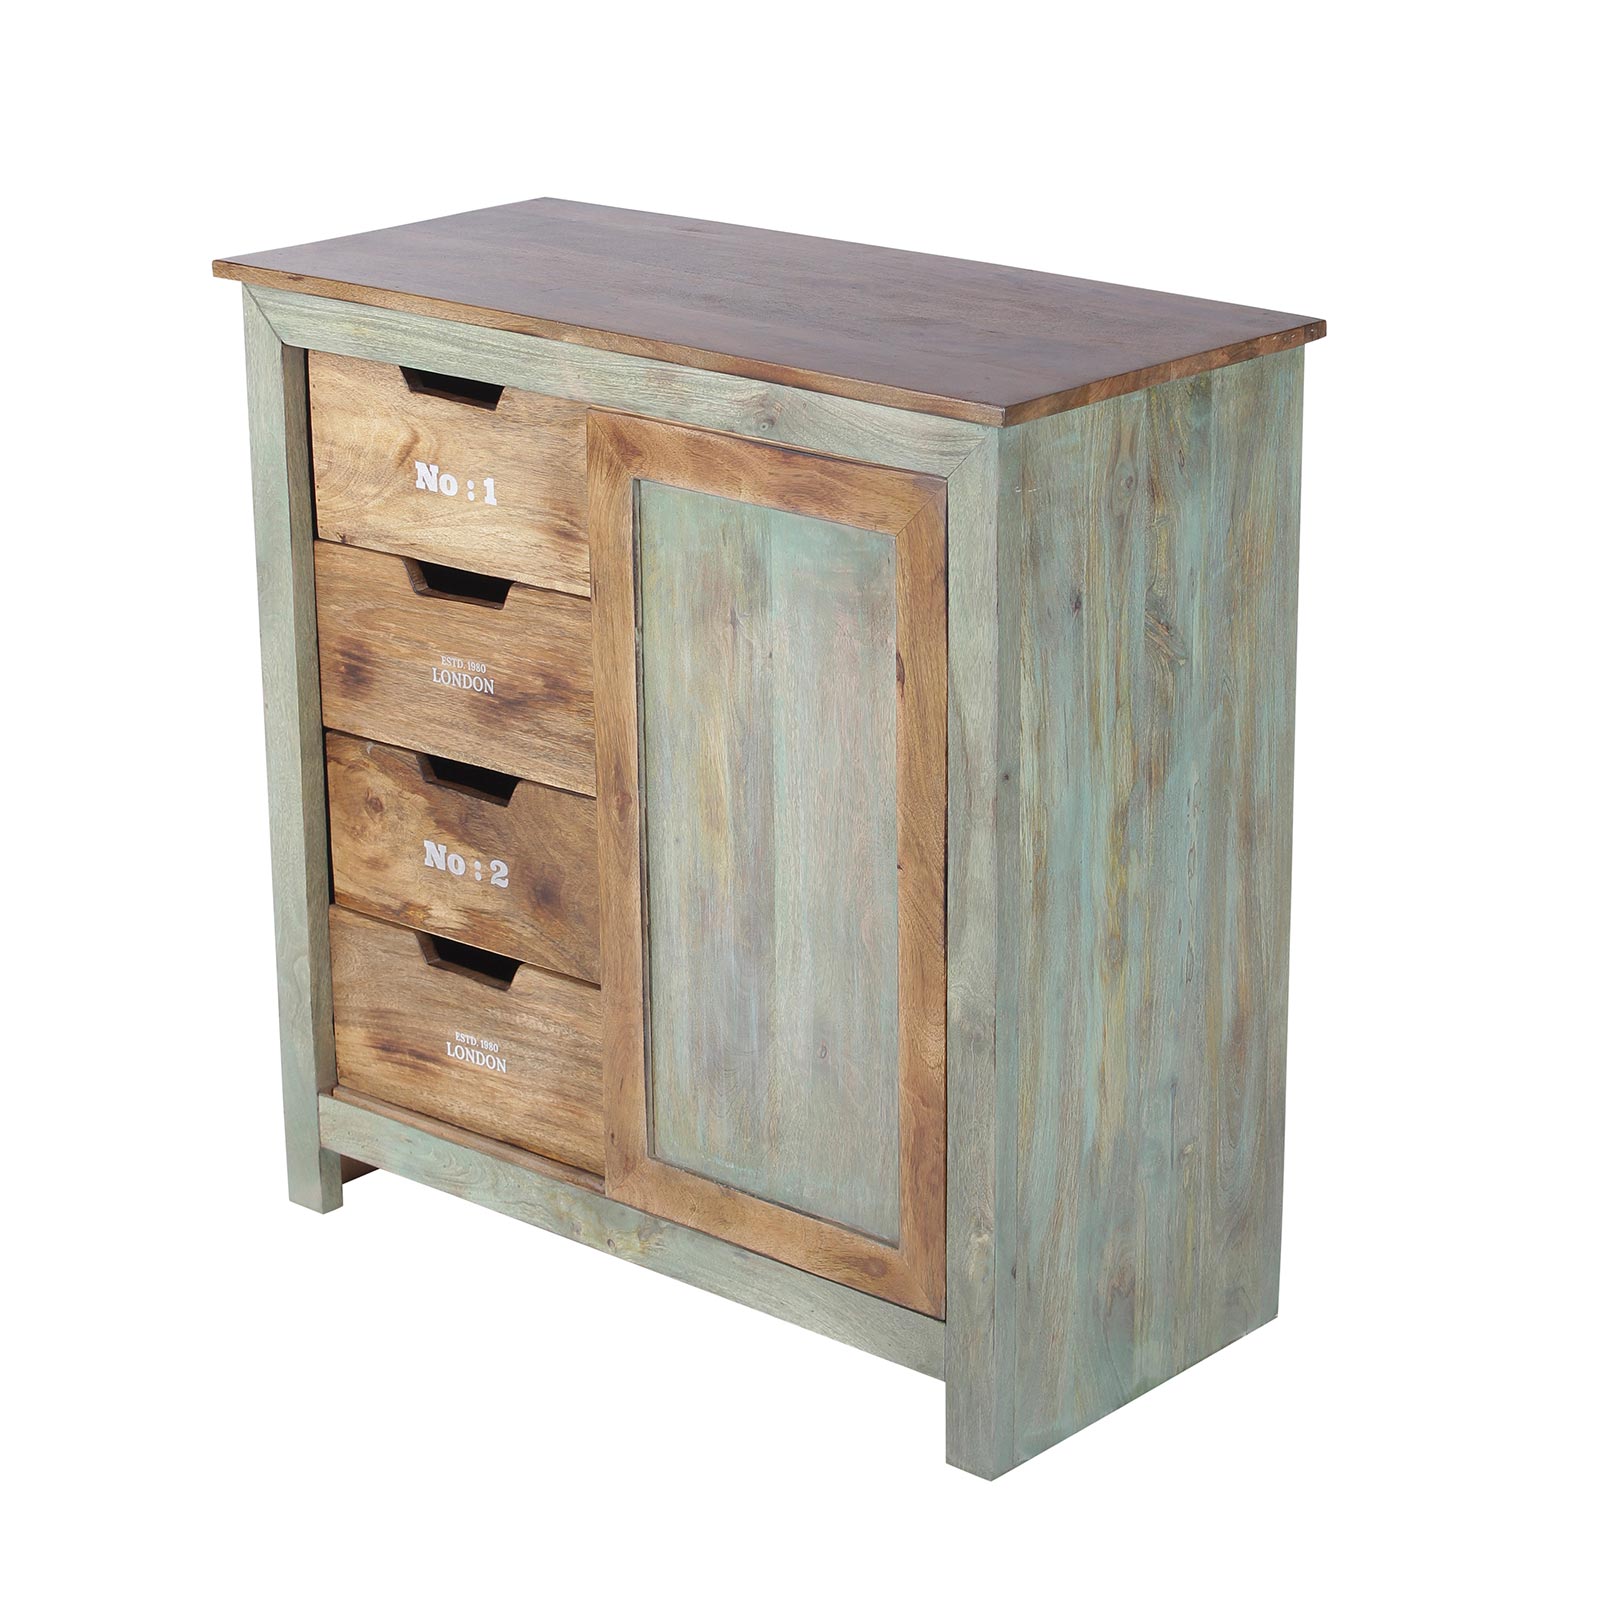 Wooden Cabinets online india